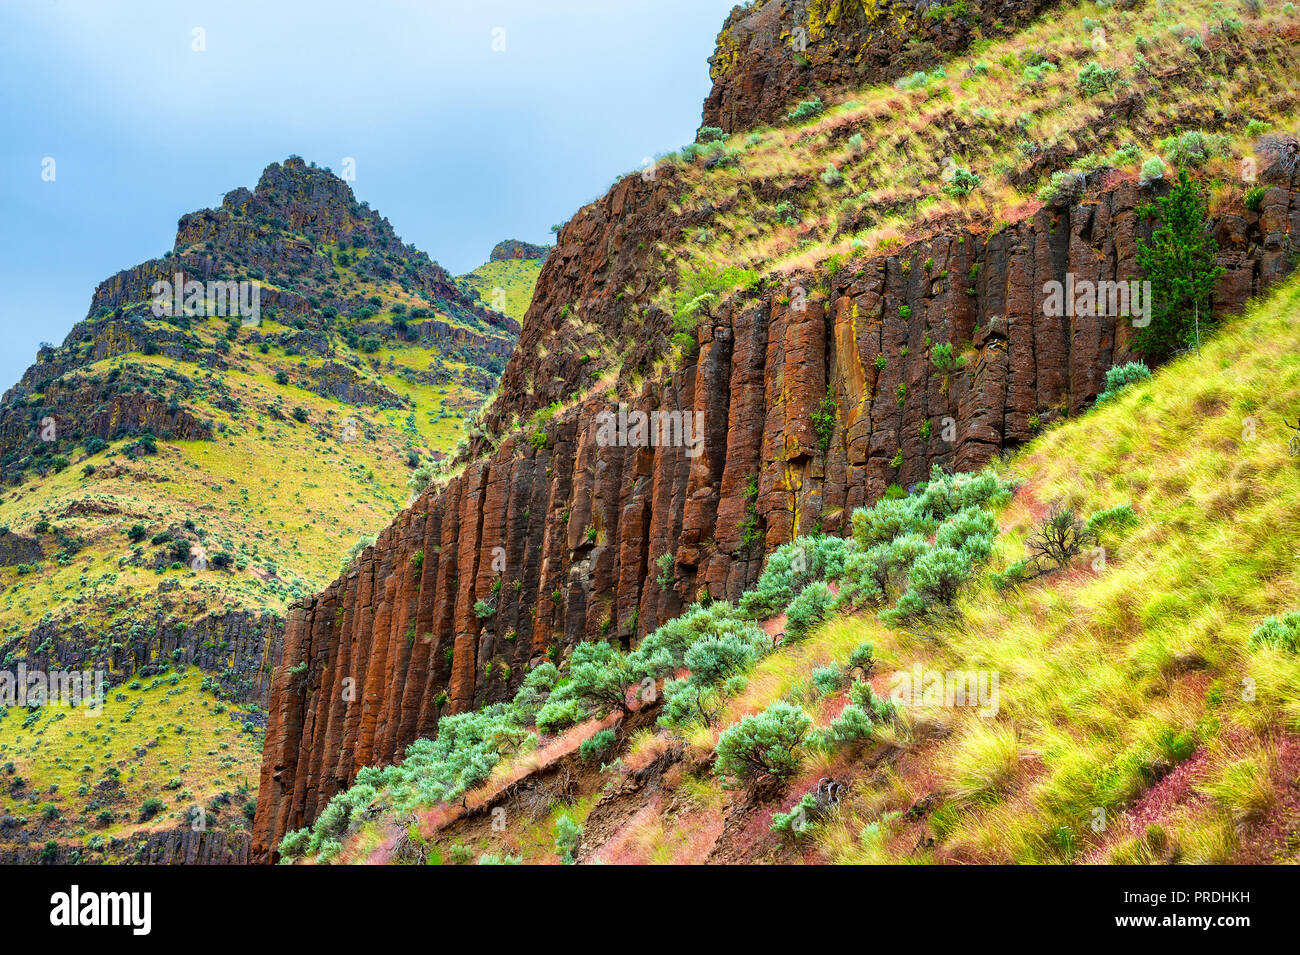 Basalt Rock formations in the Sheep Rock Unit in John Day Fossil Beds National Park in Kimberly, Oregonb Stock Photo